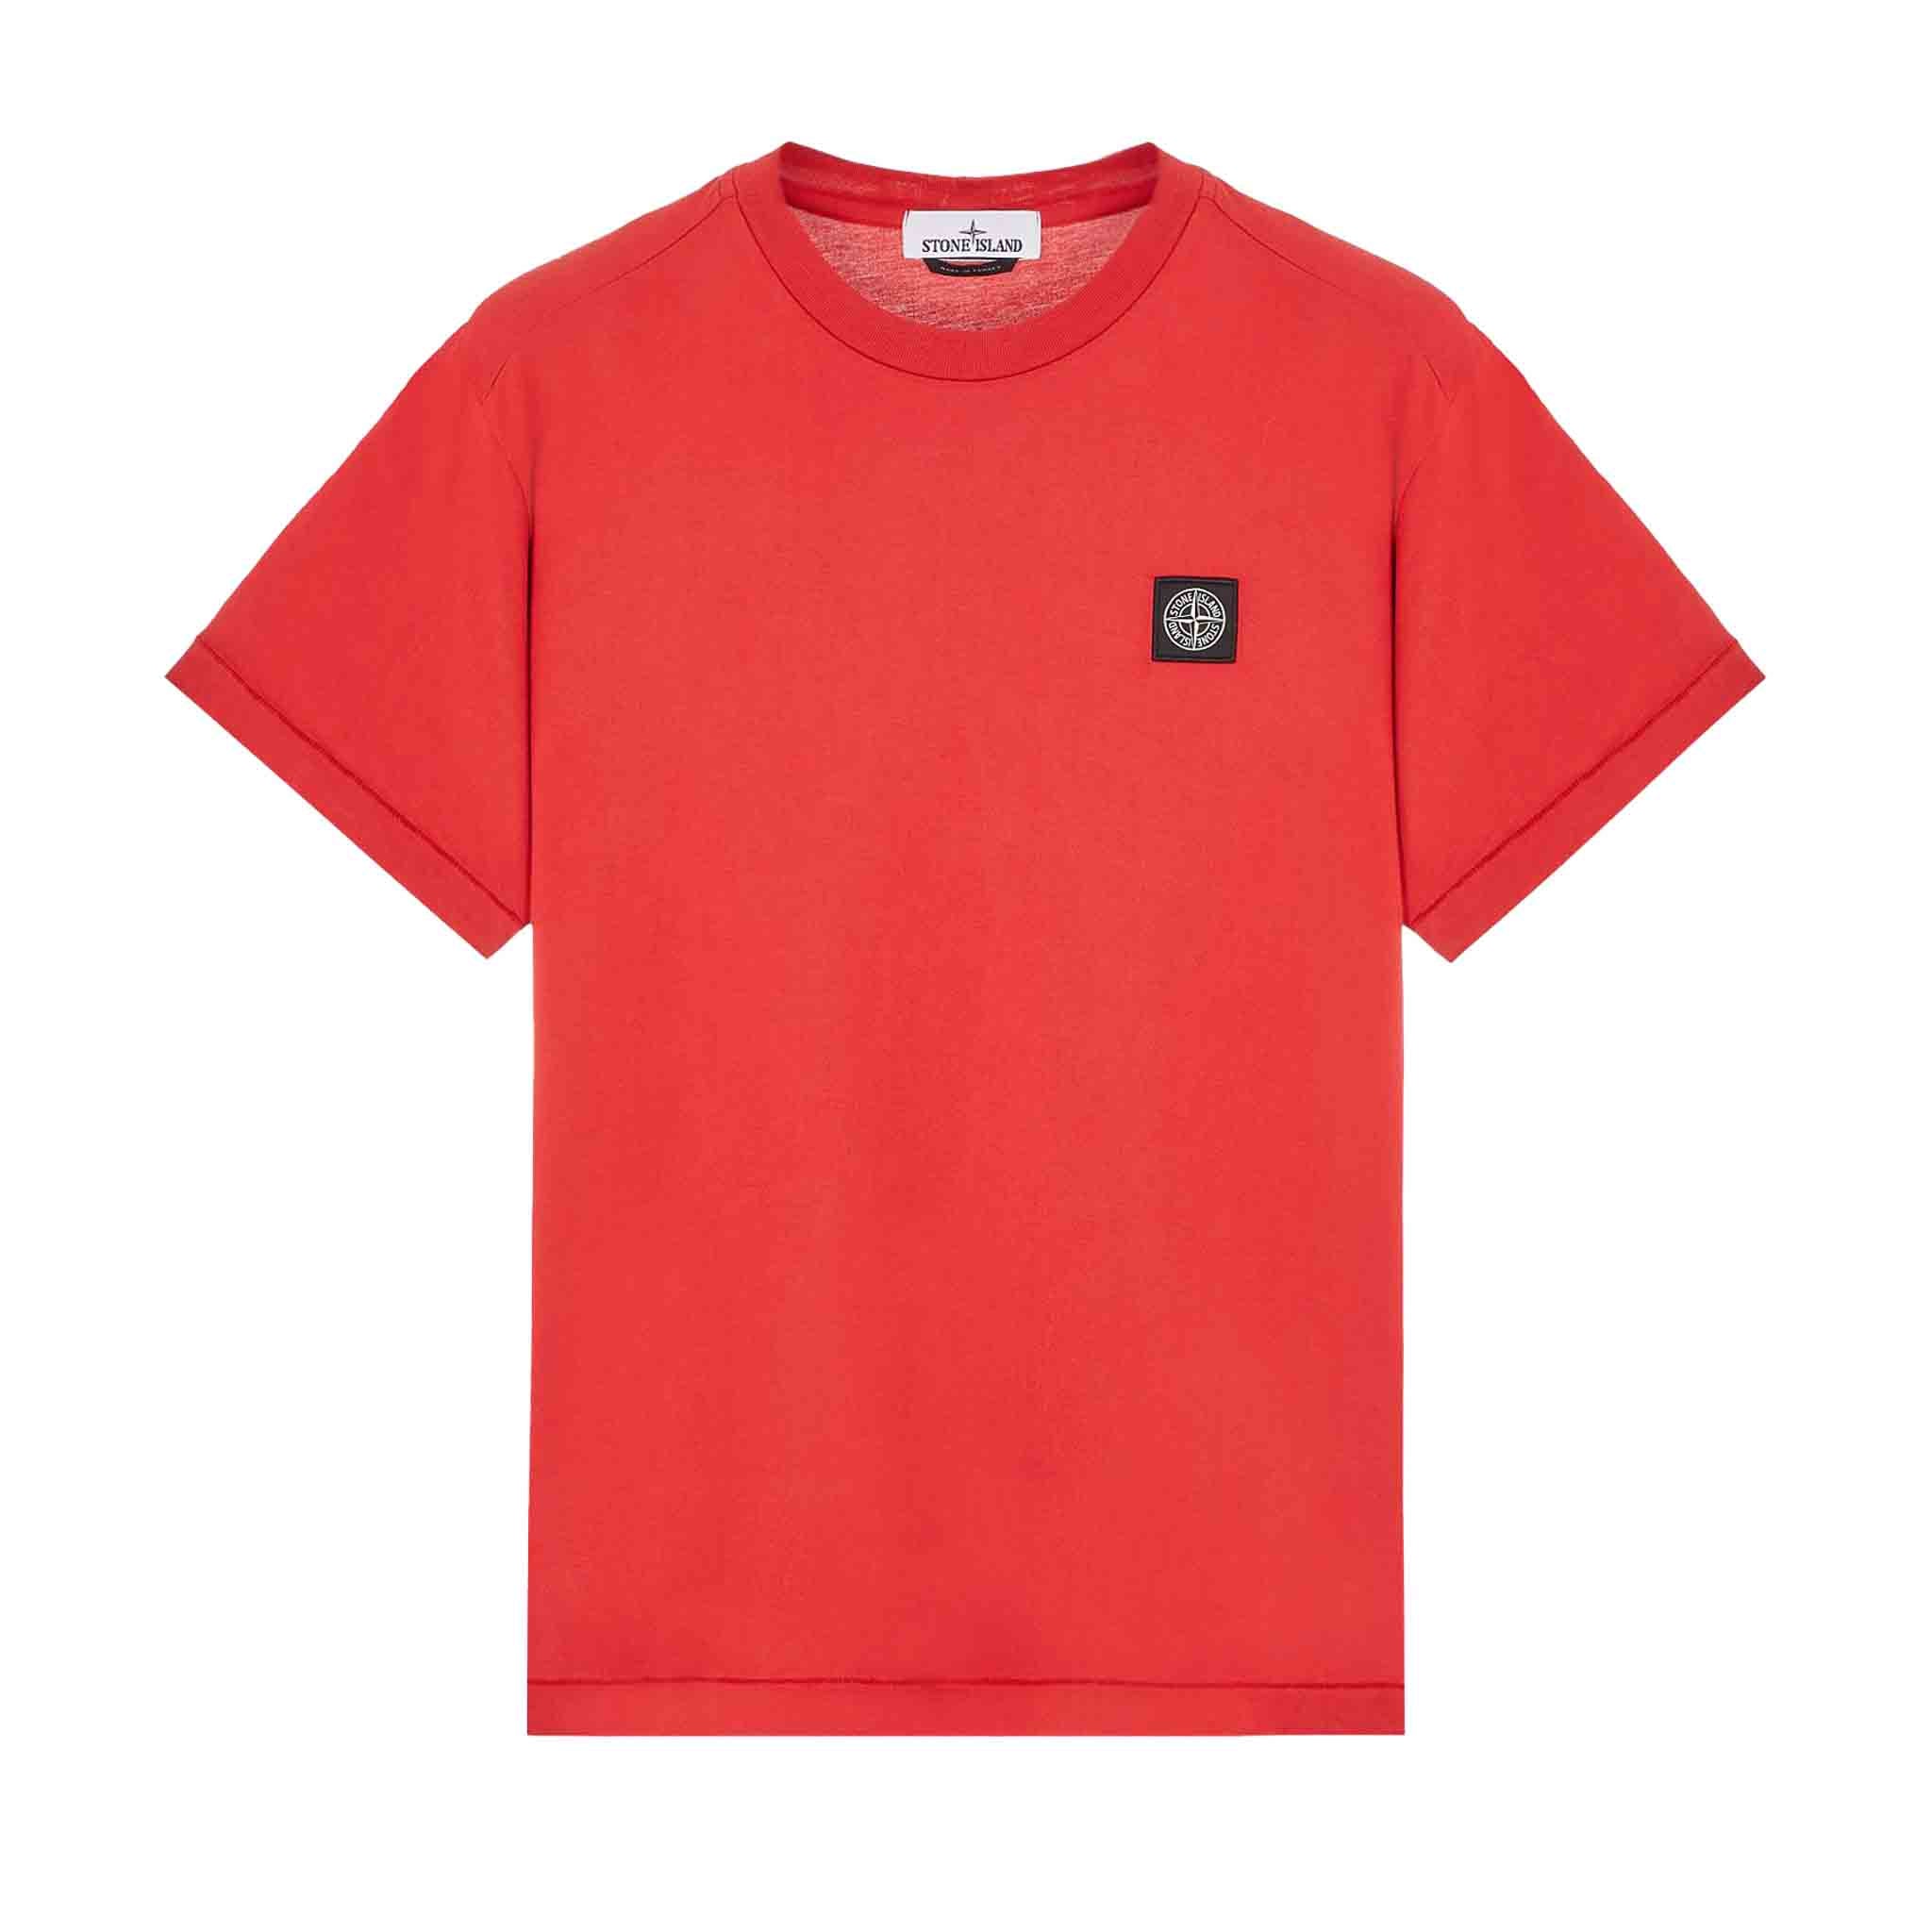 Stone Island Compass Logo T-Shirt in Red